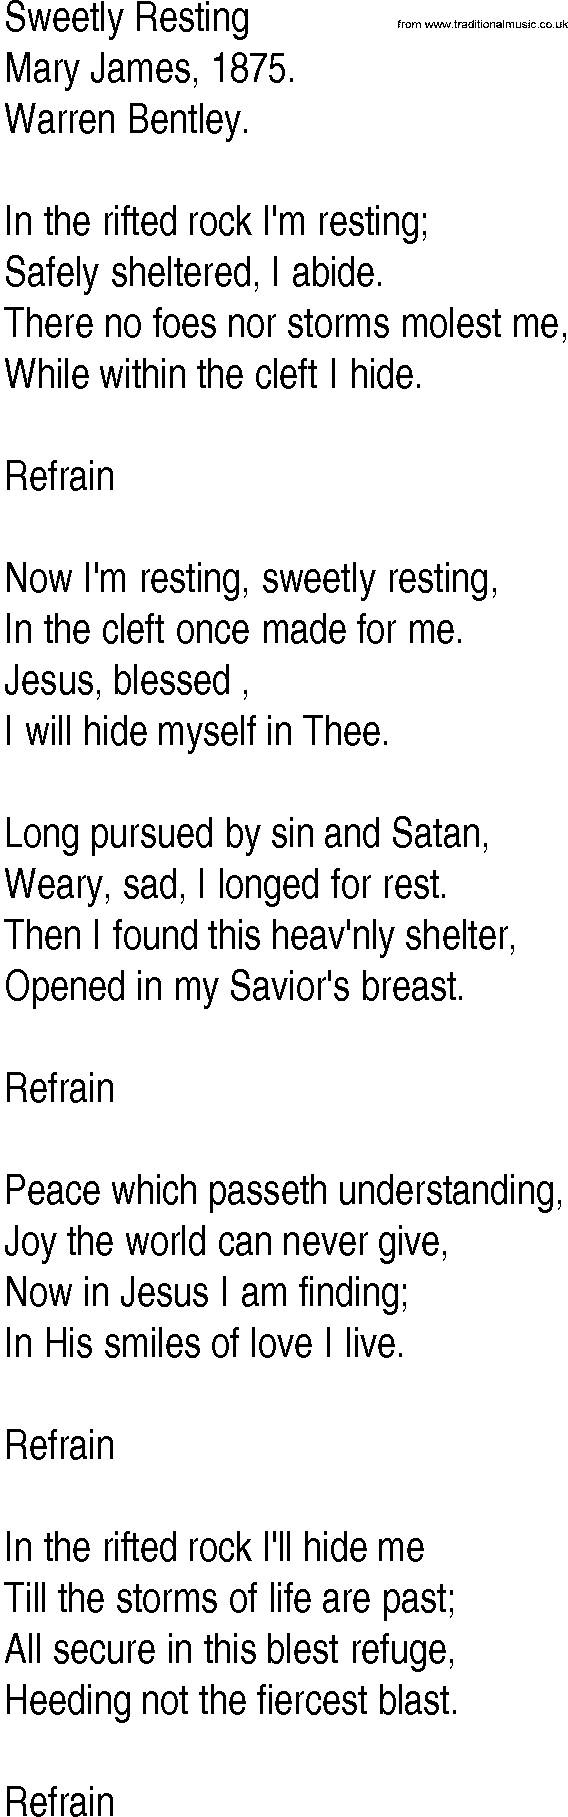 Hymn and Gospel Song: Sweetly Resting by Mary James lyrics